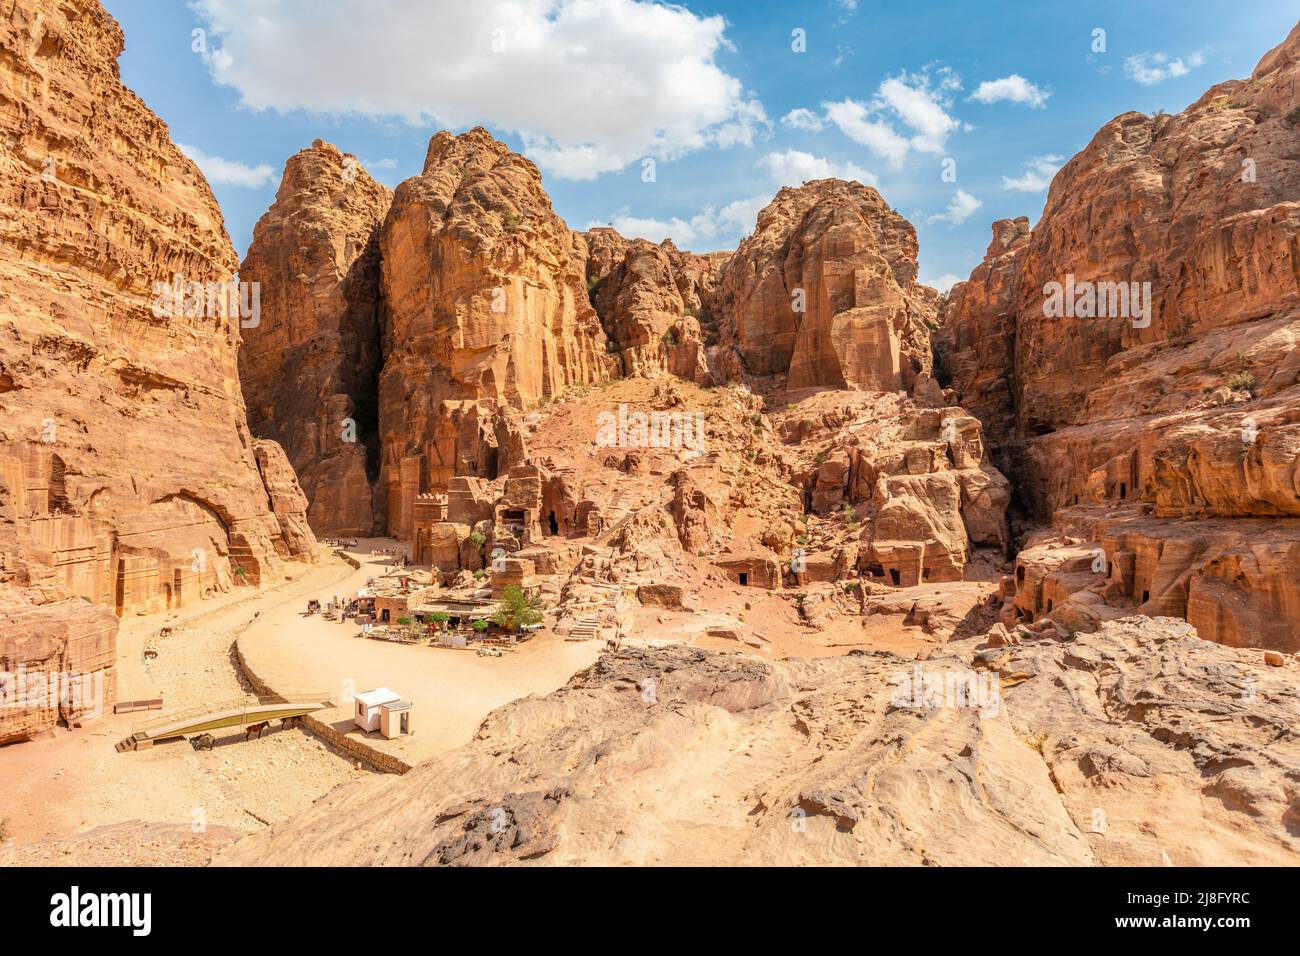 View to the facades street of Petra with ancient Nabataean tombs, Jordan Stock Photo